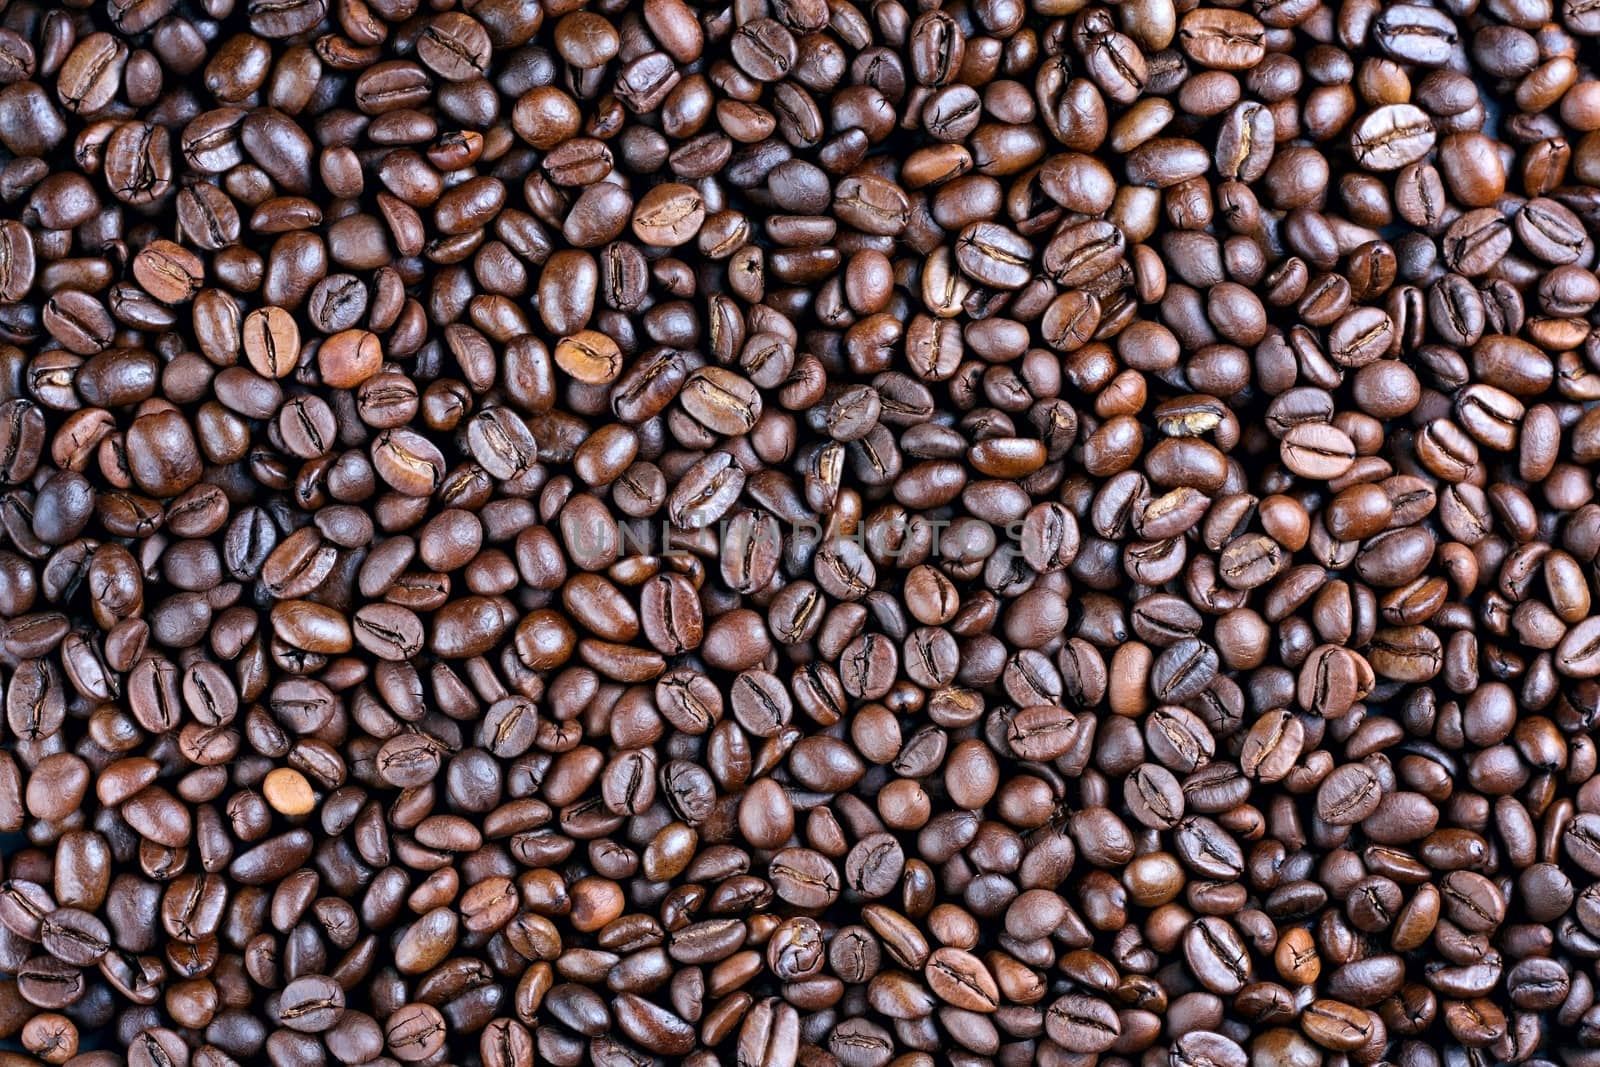 Many roasted coffee beans at background